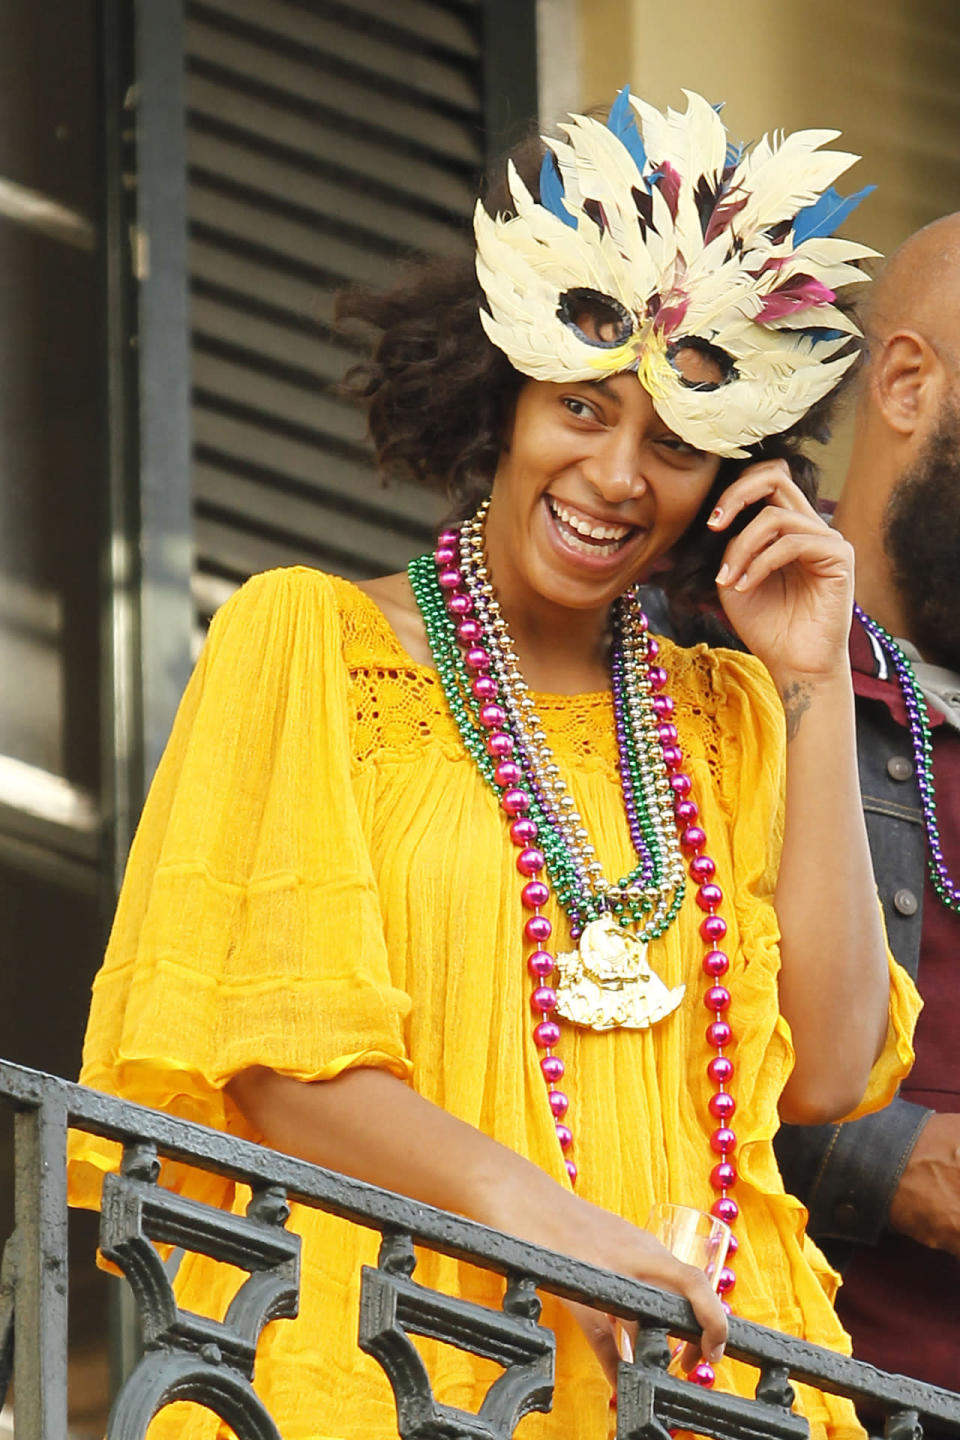 <p>Looks like Solo got an early start on the Mardi Gras fun when she was spottefd on a balcony taking in the Mystic Krewe of Barkus parade in the French Quarter. Solange wore a flowy, fluttery yellow dress with crochet detailing at the collarbone. Colorful beads and a feathery mask completed the festive look, which got us <i>so</i> excited for her actual Mardi Gras outfit. (<i>Photo: Splash)</i></p>